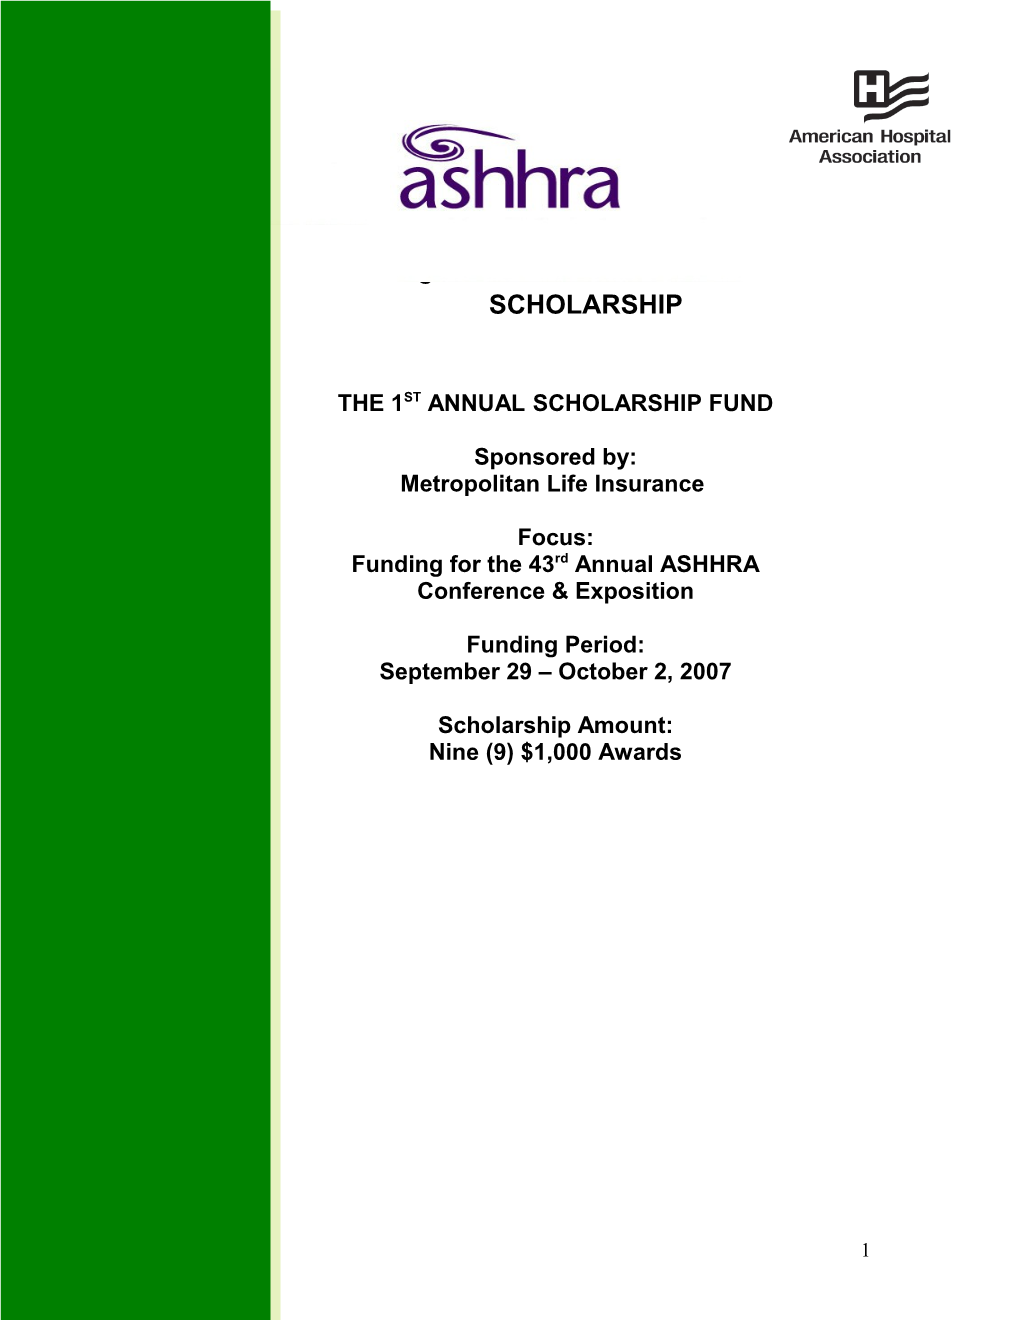 ASHHRA 1St Annual Conference Scholarship Fund